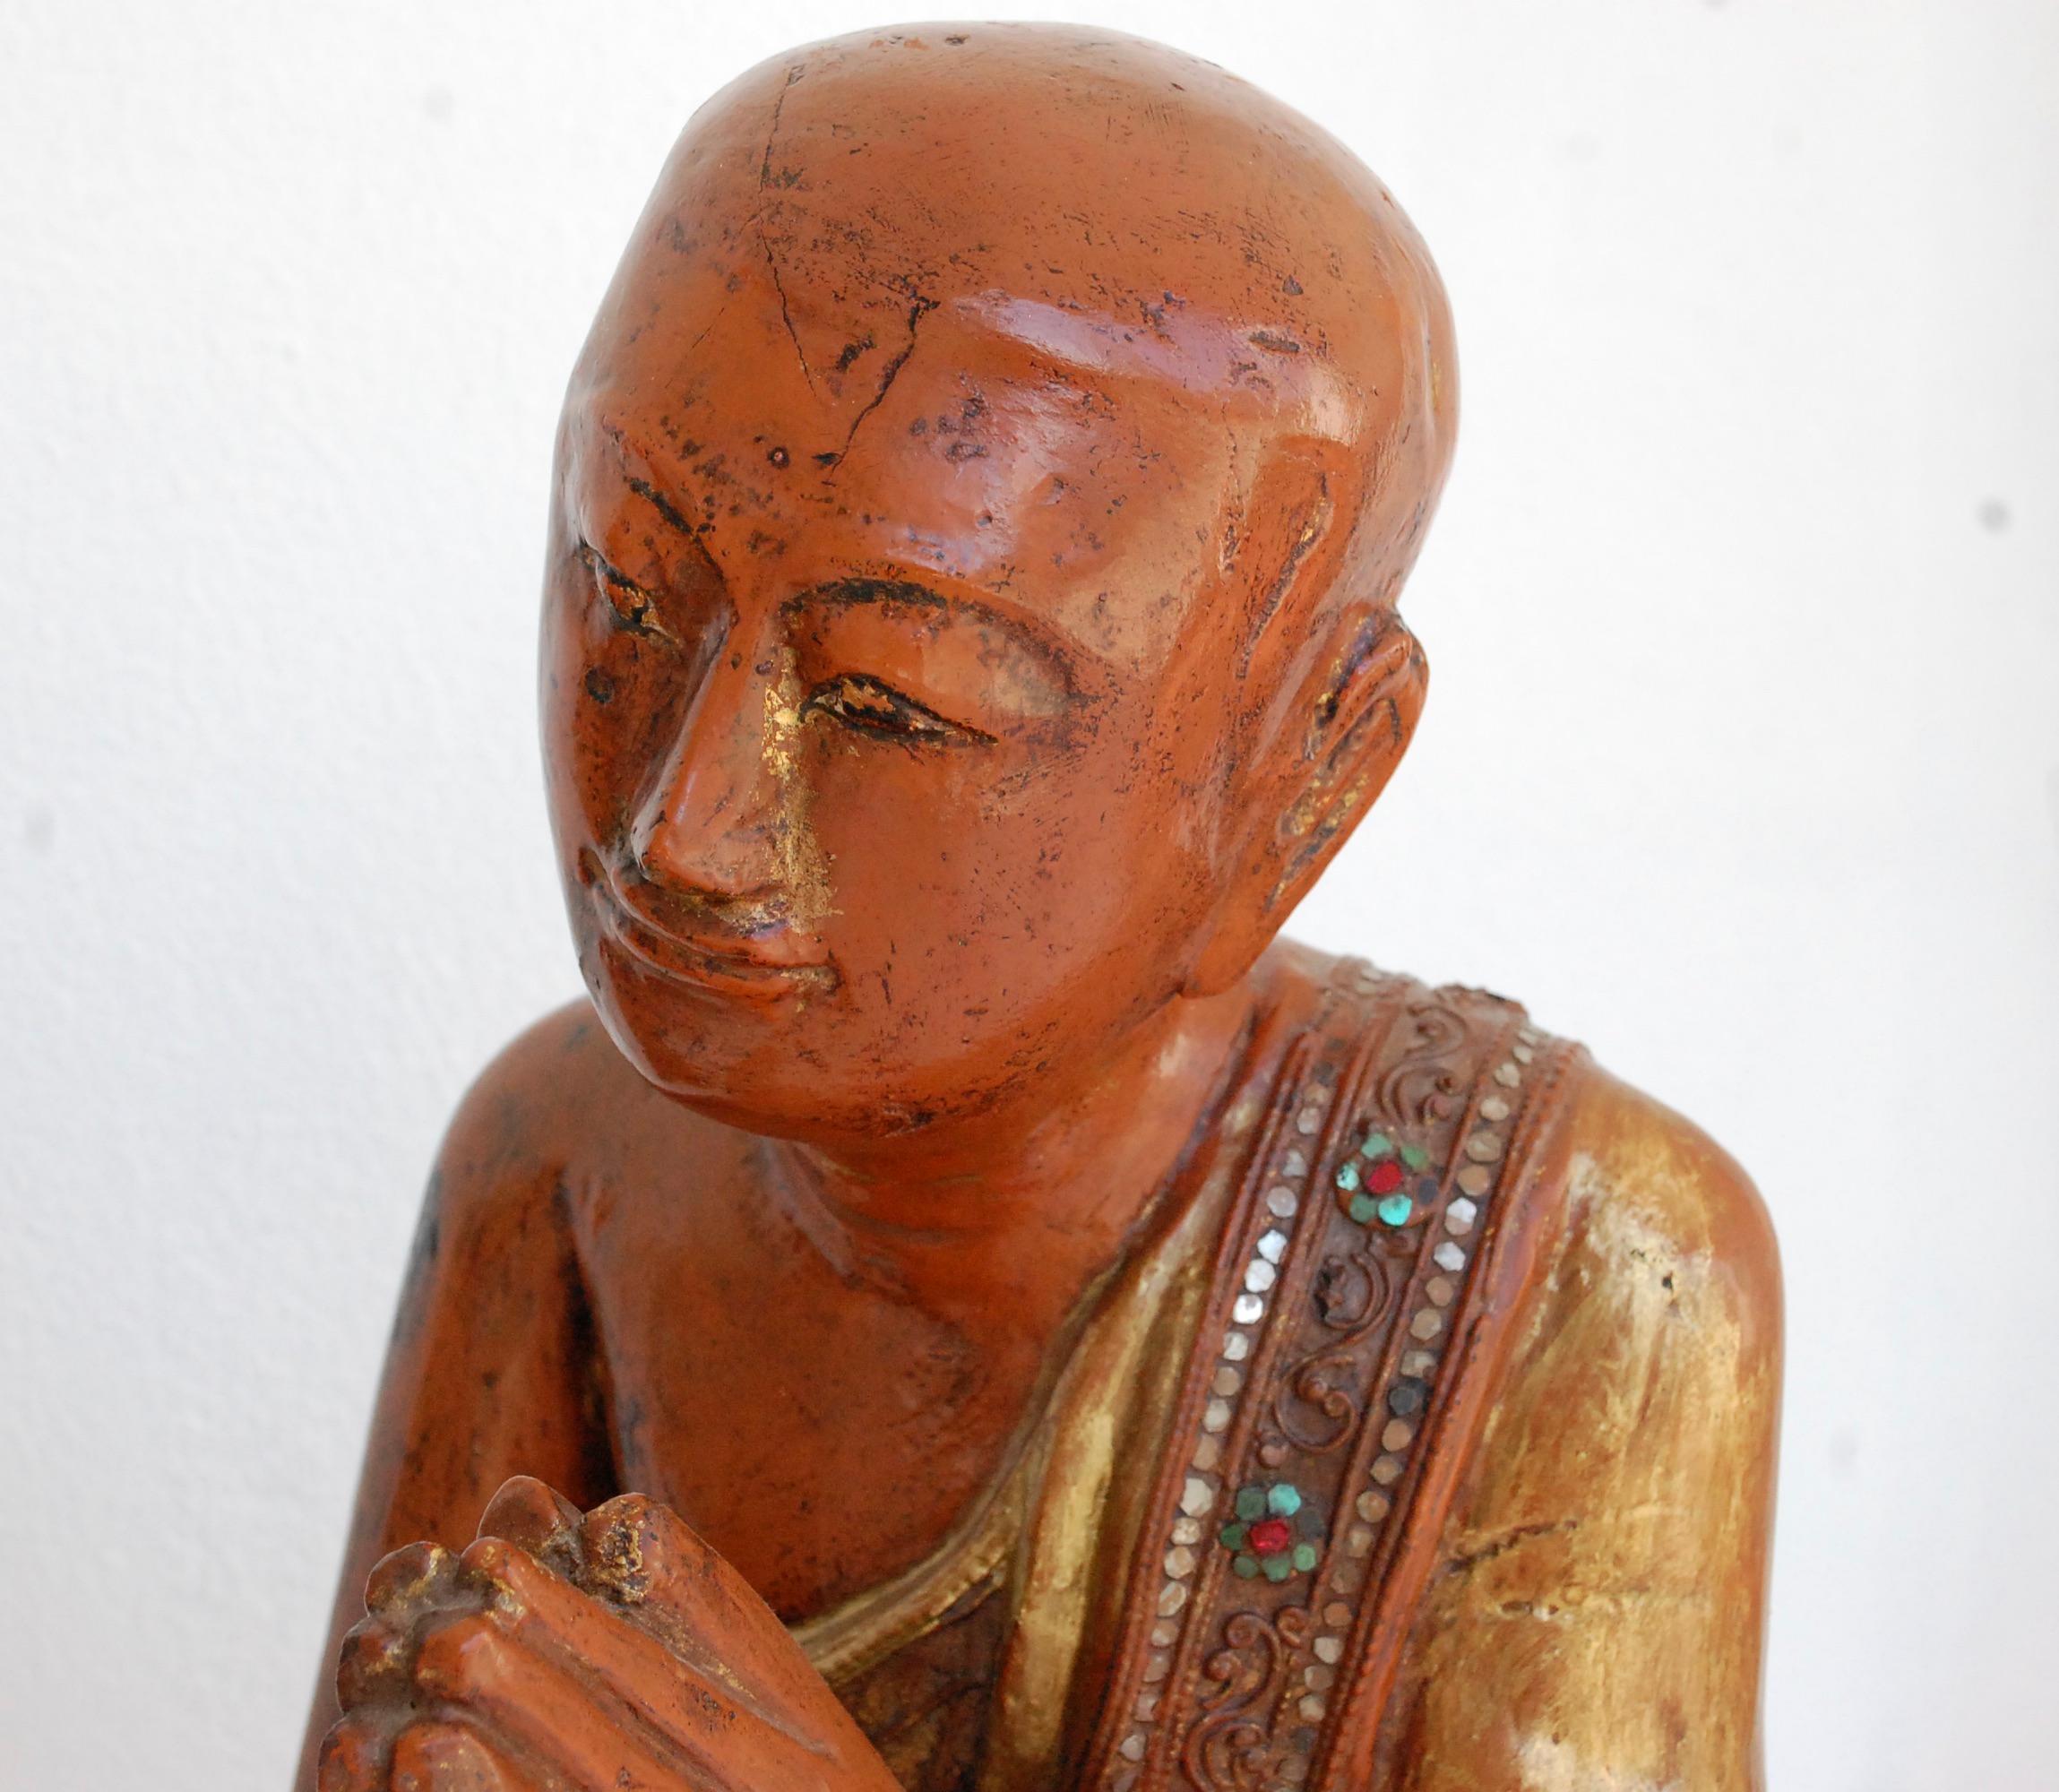 Pair of 19th Century Buddhist Monks  - Brown Figurative Sculpture by Unknown